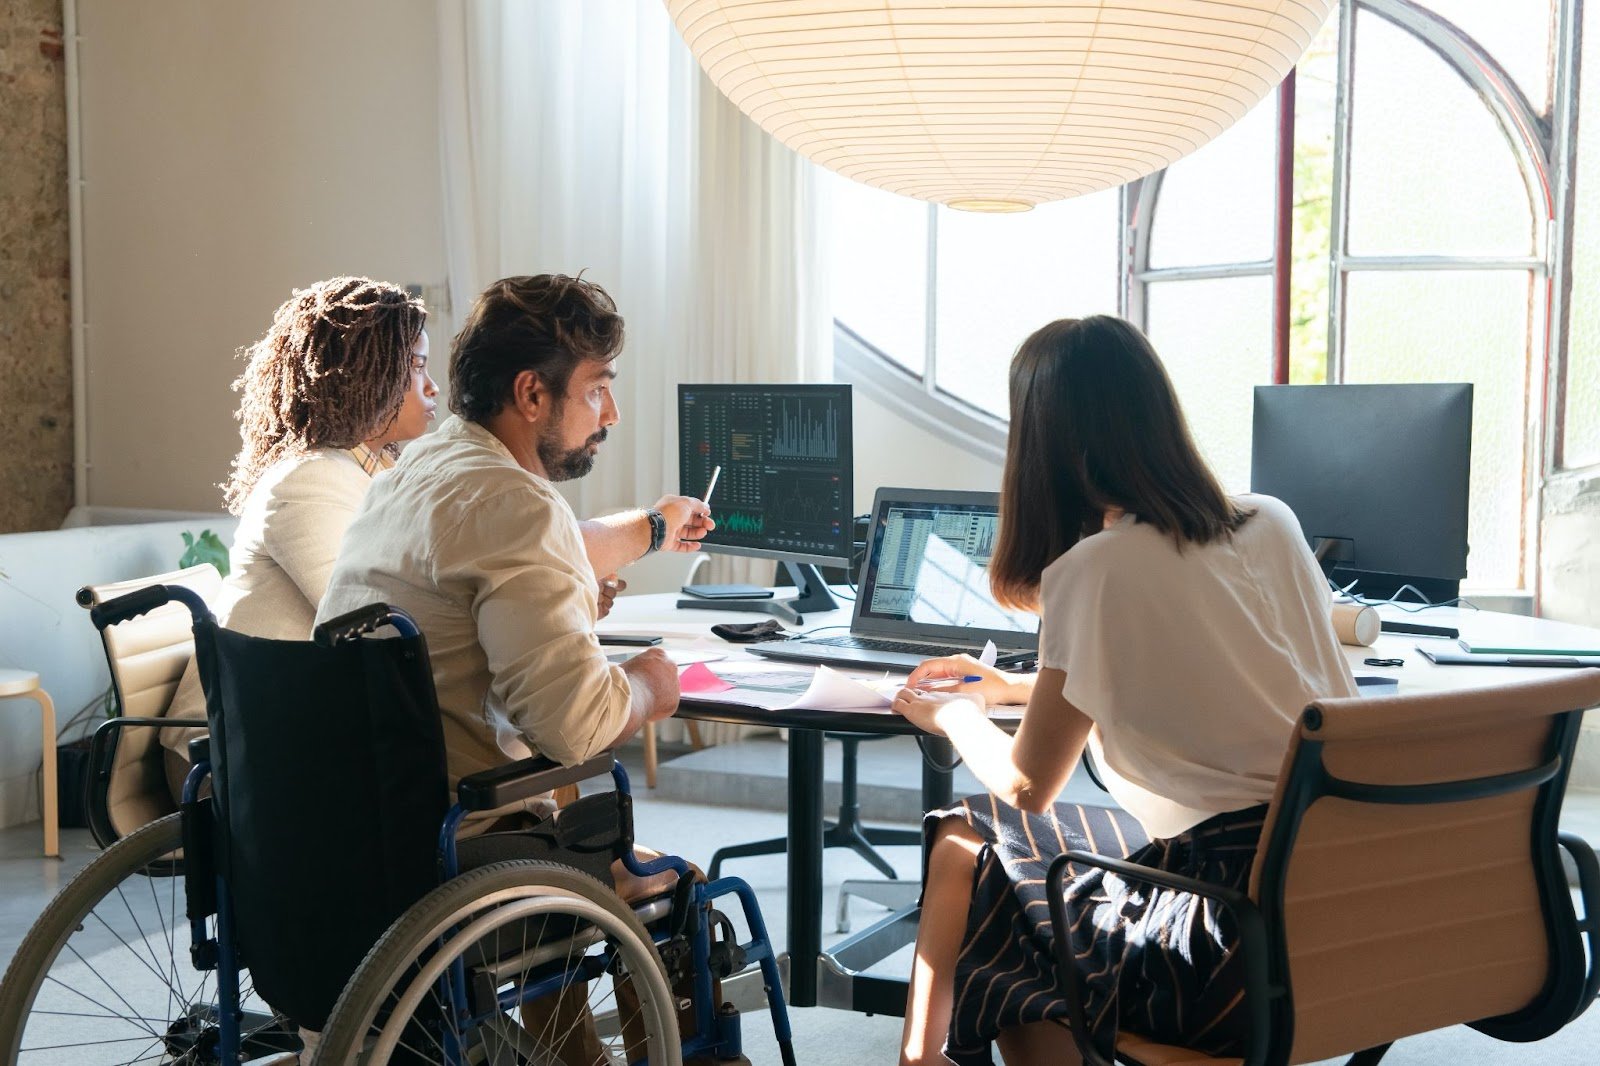 A man in a wheelchair sits with two women working at a desk.